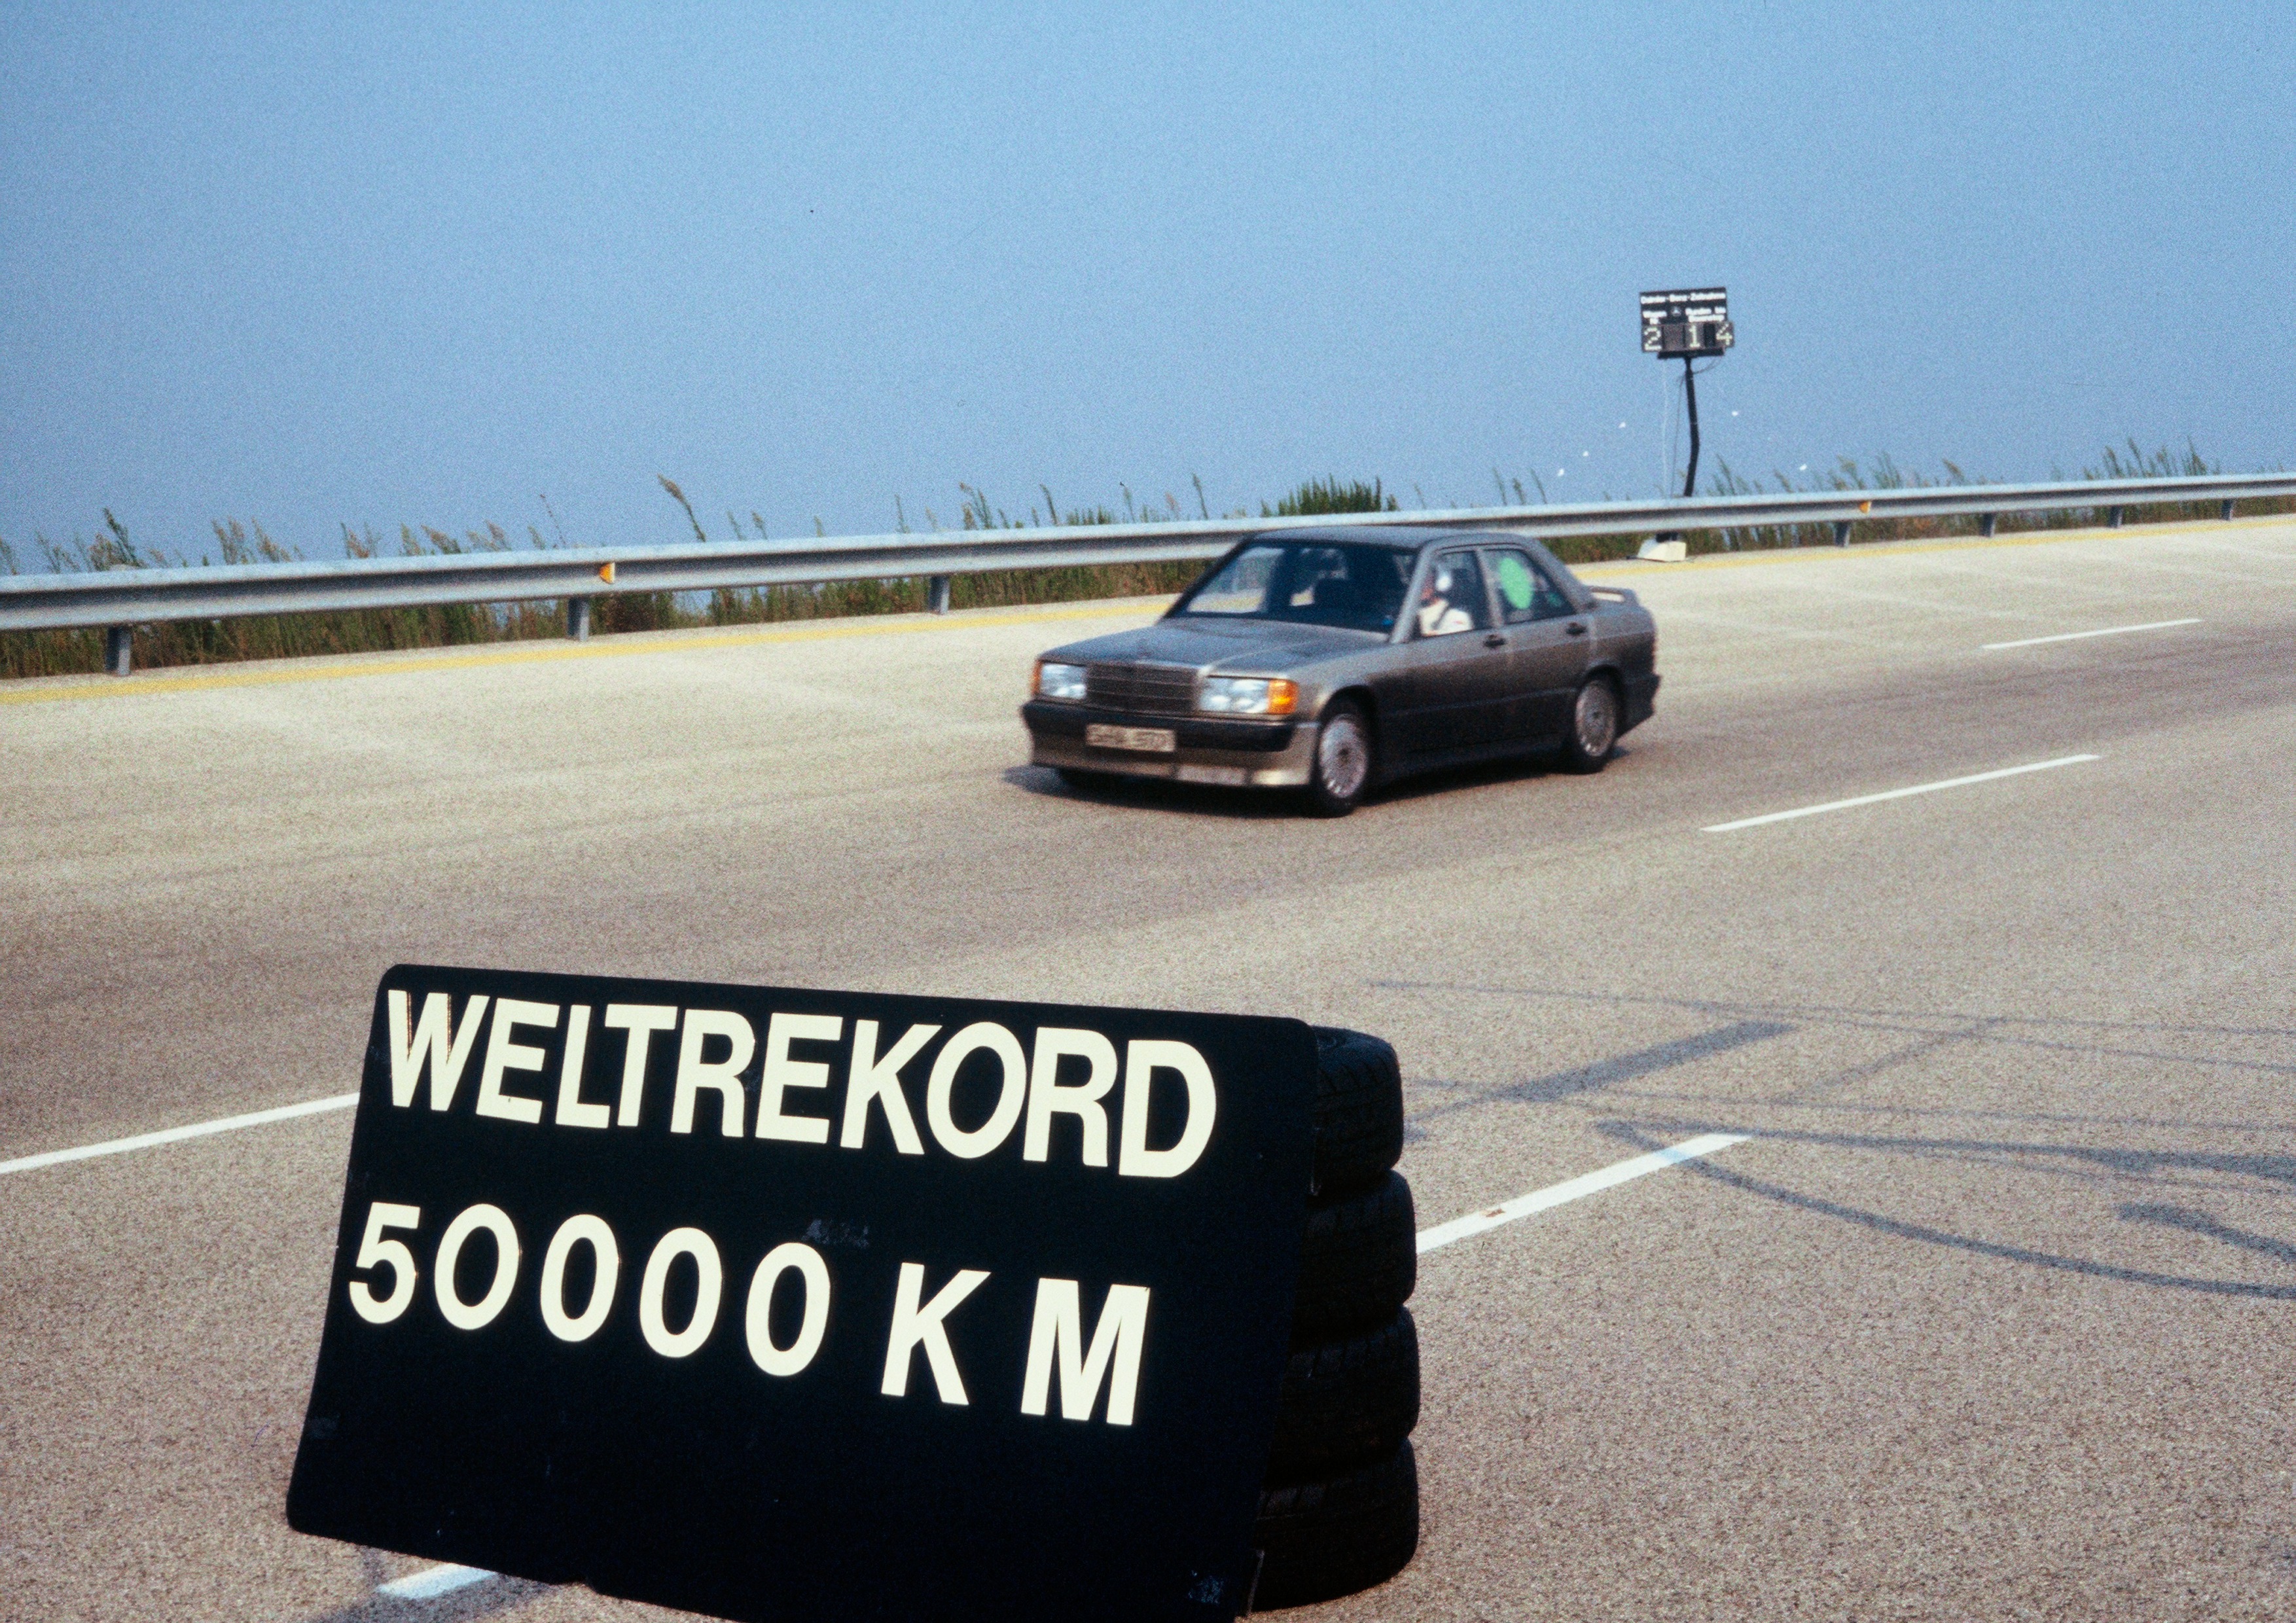 A long-playing record: 50,000km in 201 hours in a Mercedes 190 E 2.3-16